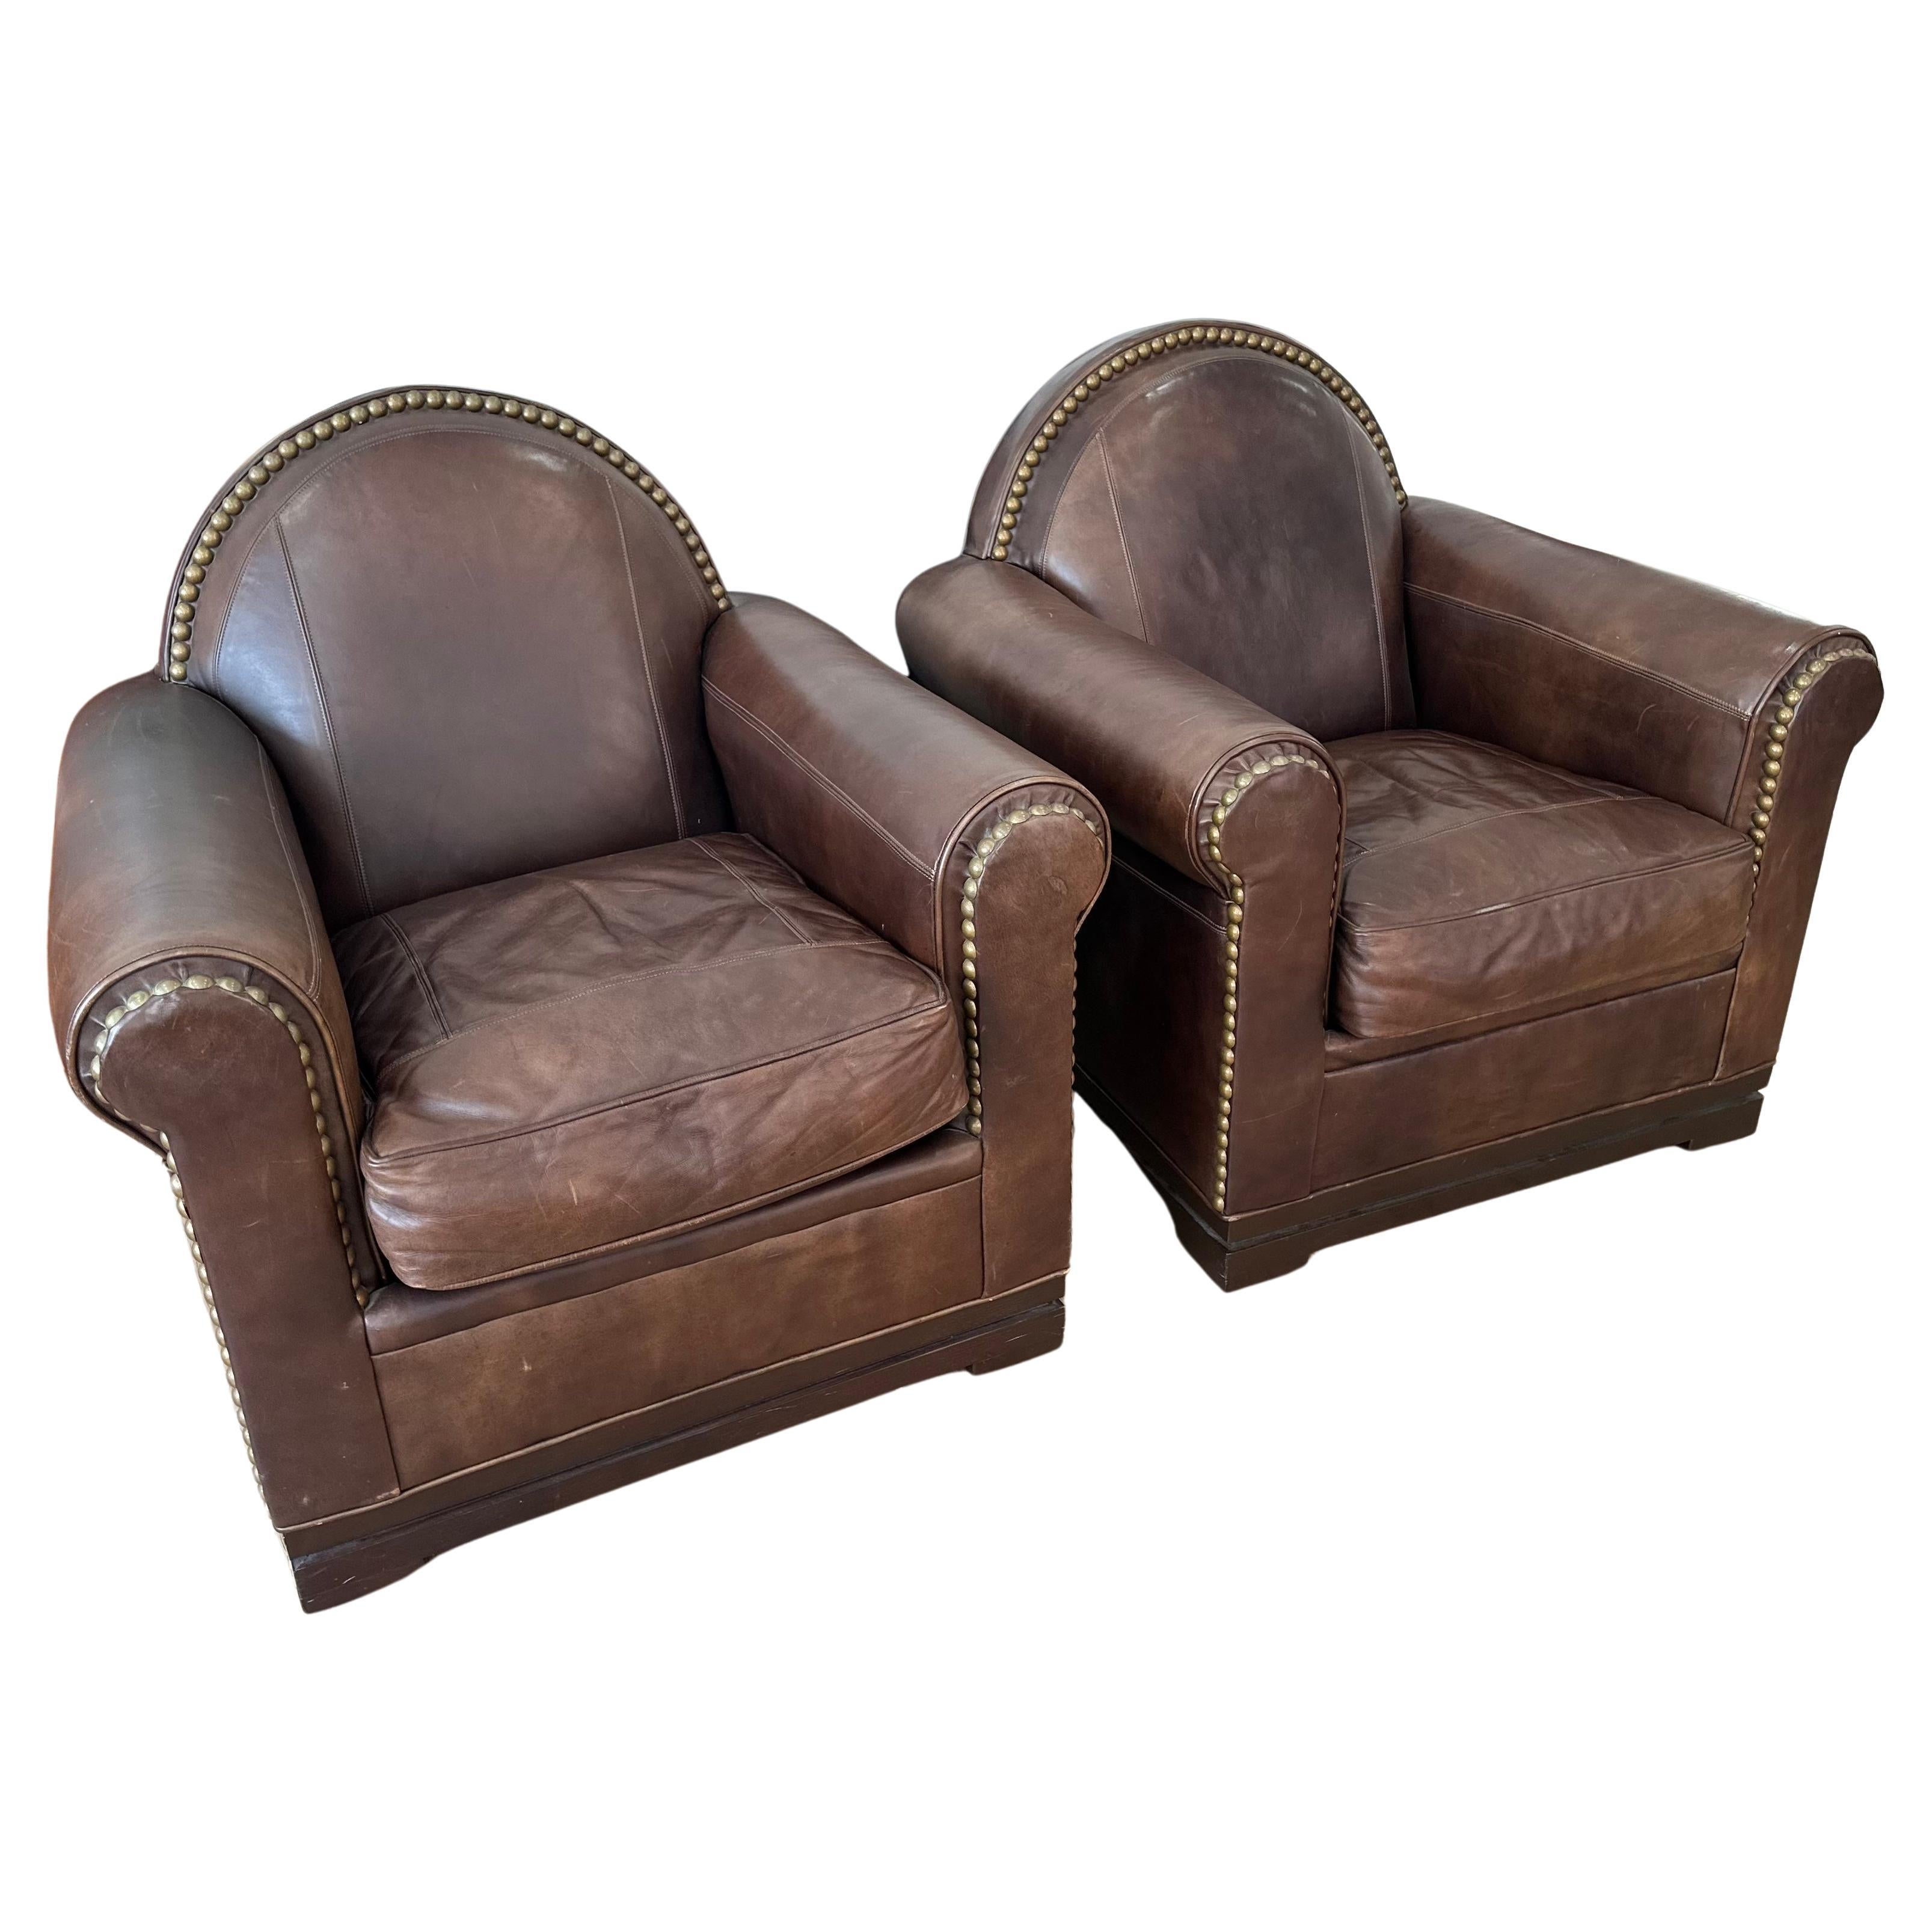 Pair of Art Deco Style Leather Club Chairs by Mulholland Brothers For Sale